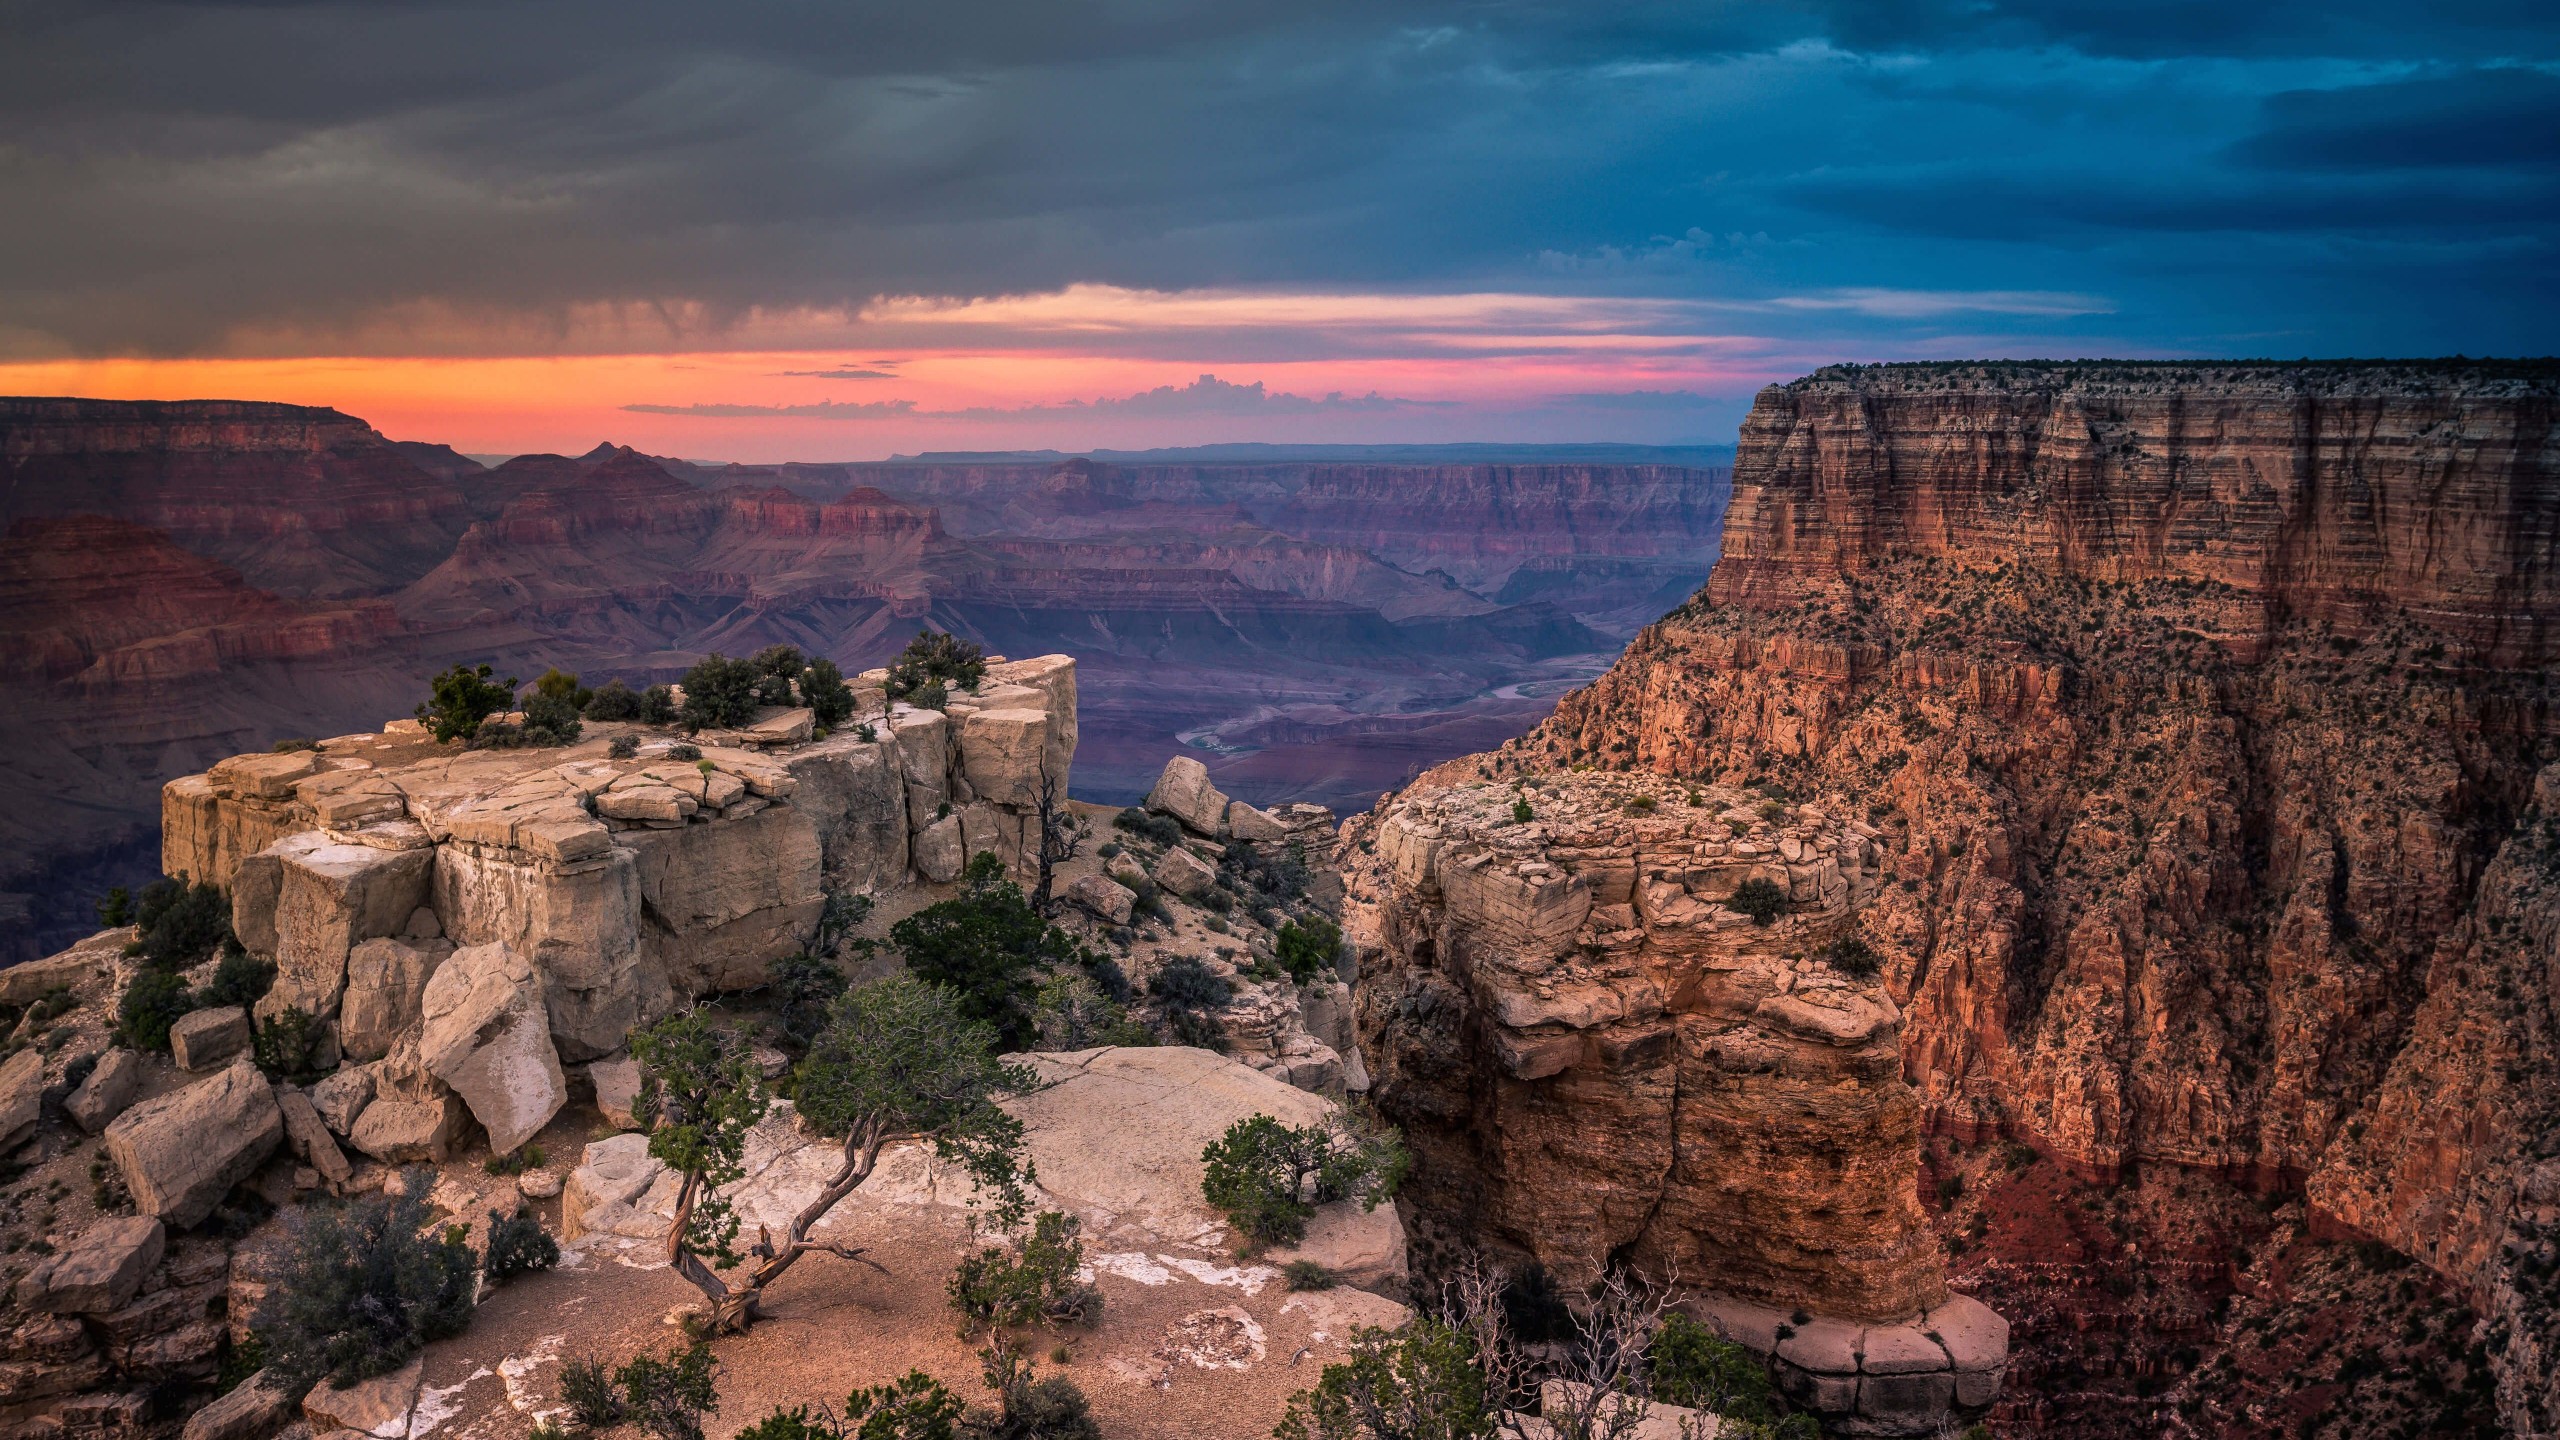 Sunset At The Grand Canyon Wallpaper for Desktop 2560x1440